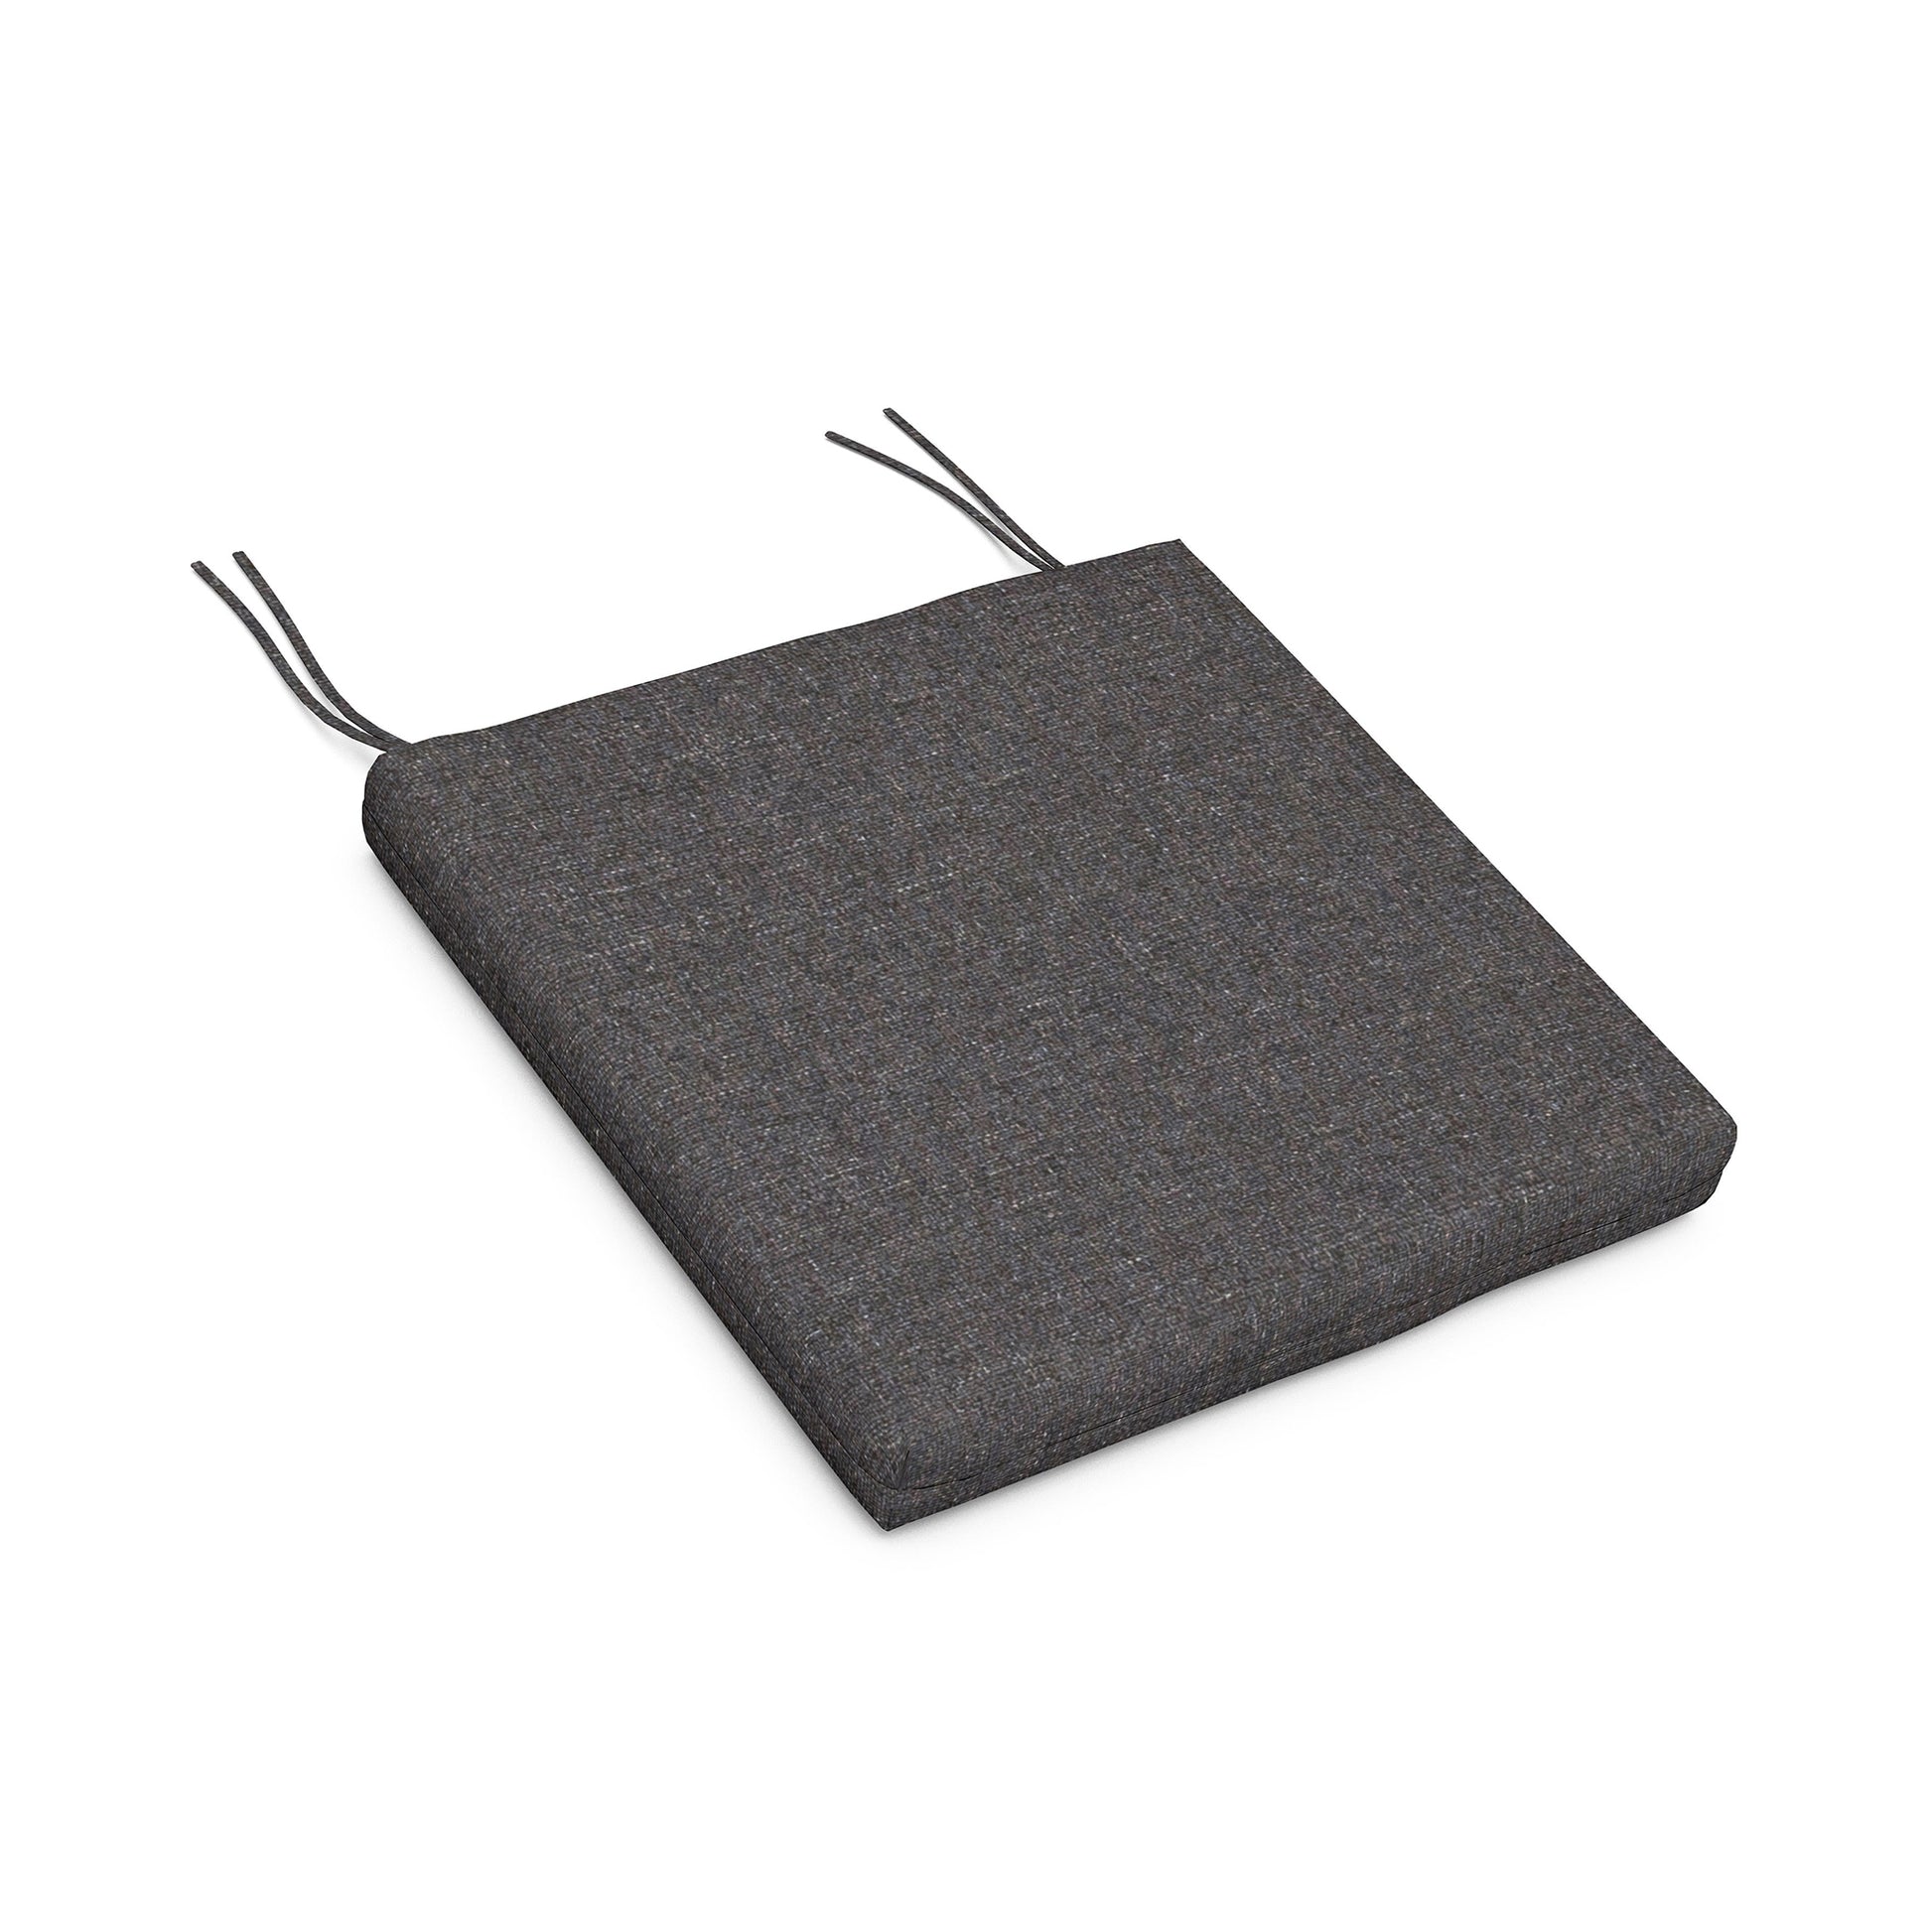 A dark gray, square POLYWOOD® XPWS0172 - Seat Cushion with two protruding tie strings for securing it to a chair, isolated on a white background.